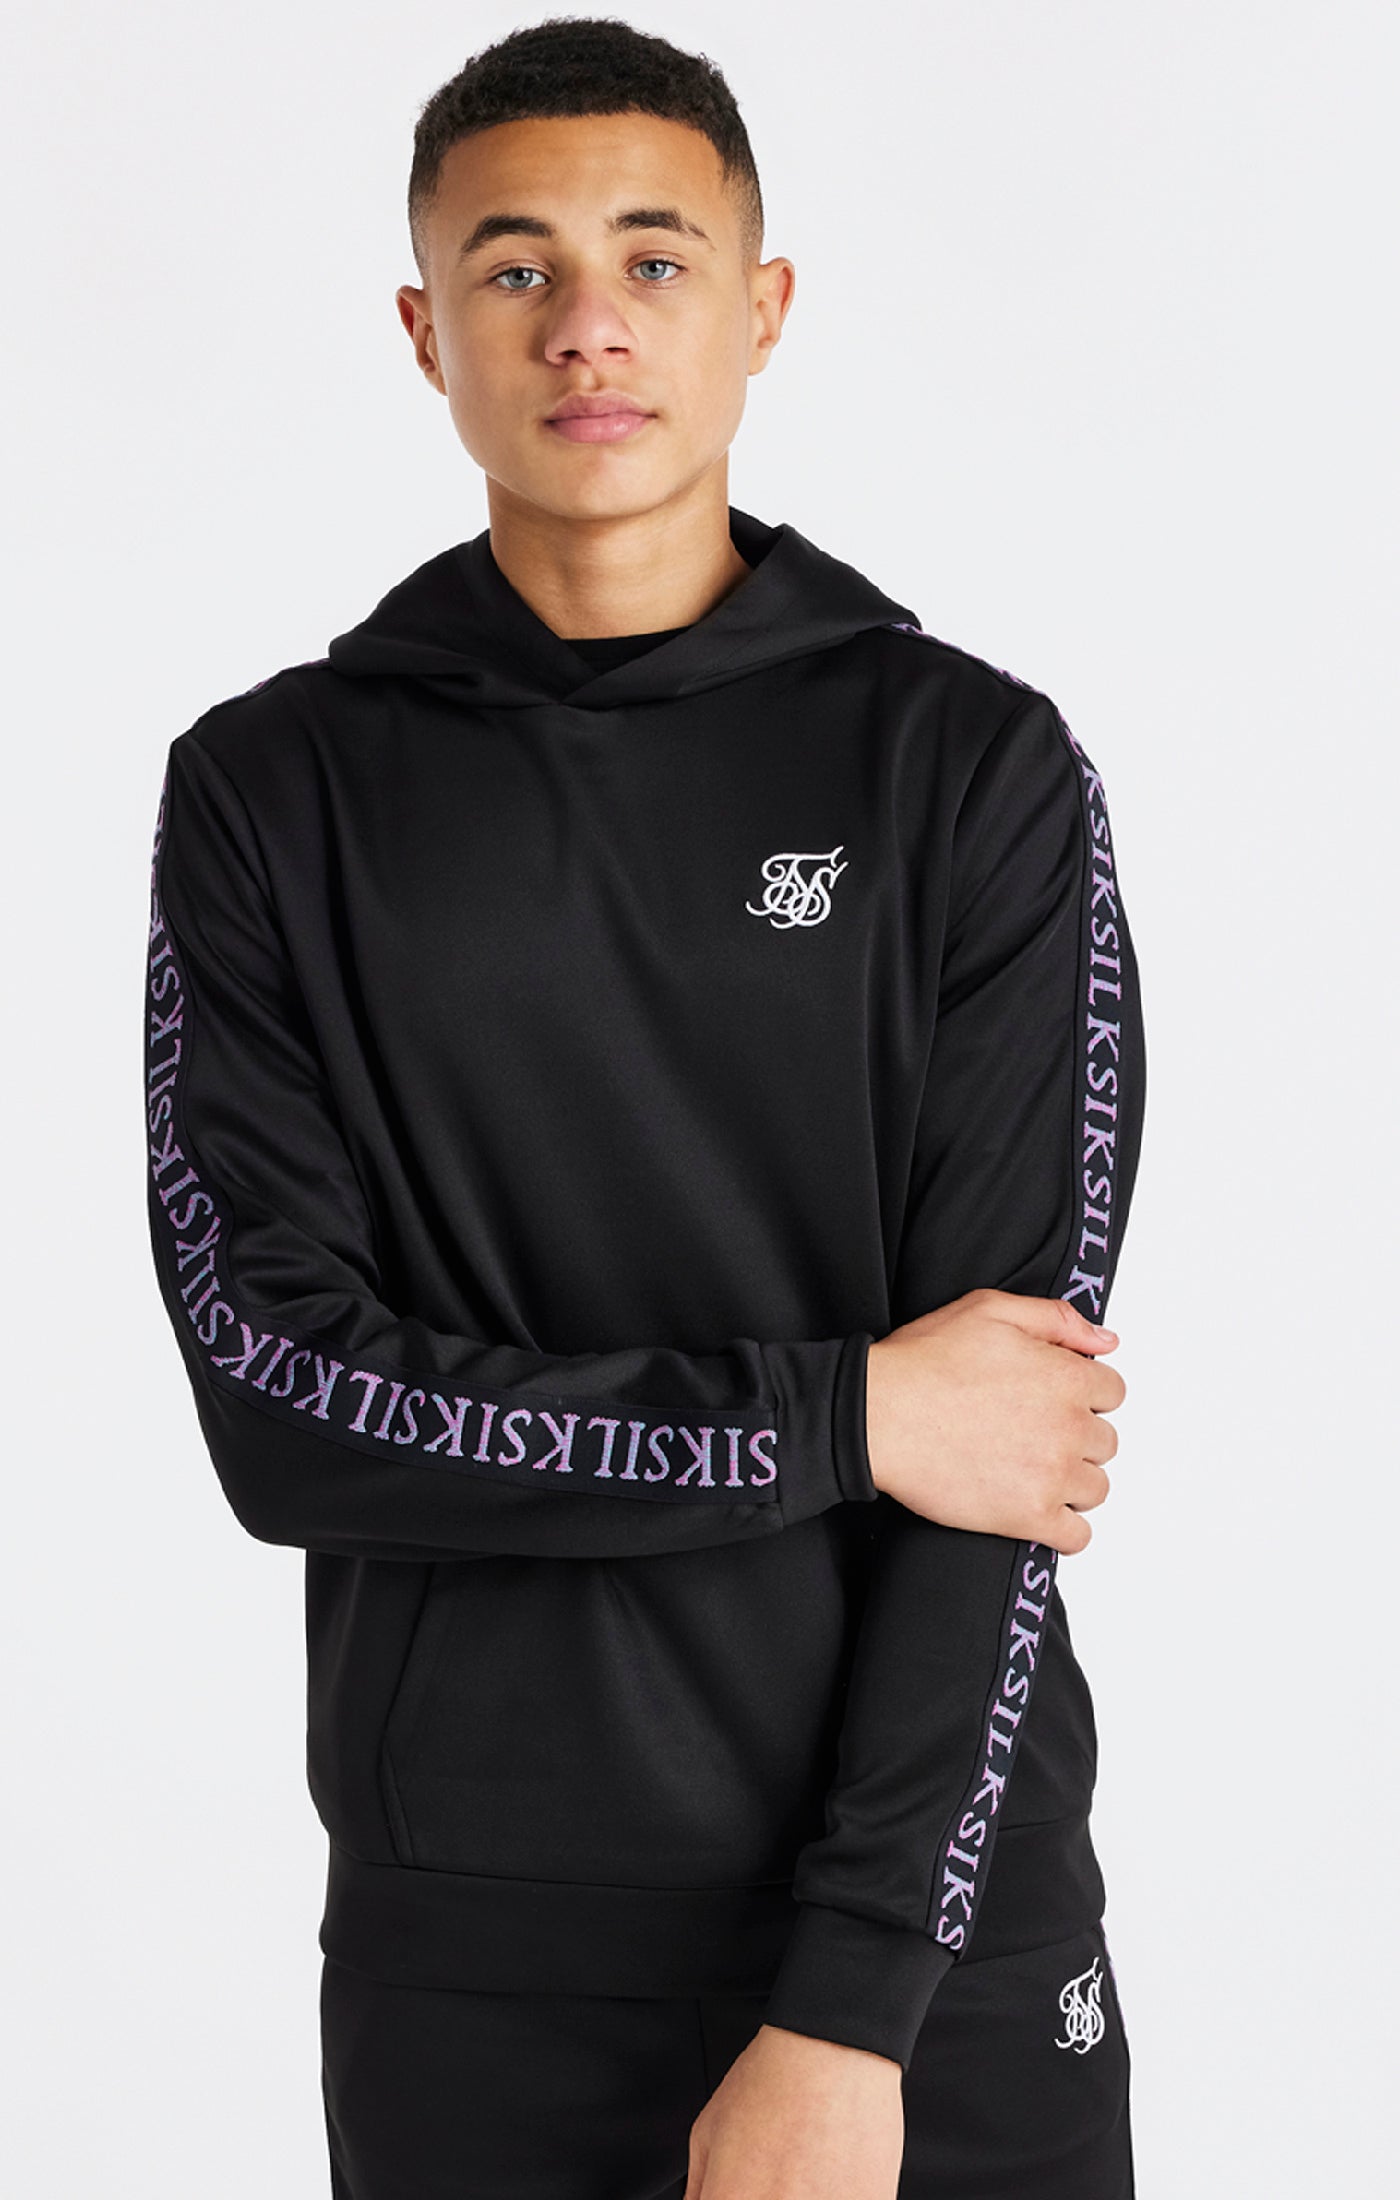 Load image into Gallery viewer, Boys Black Taped Hoodie